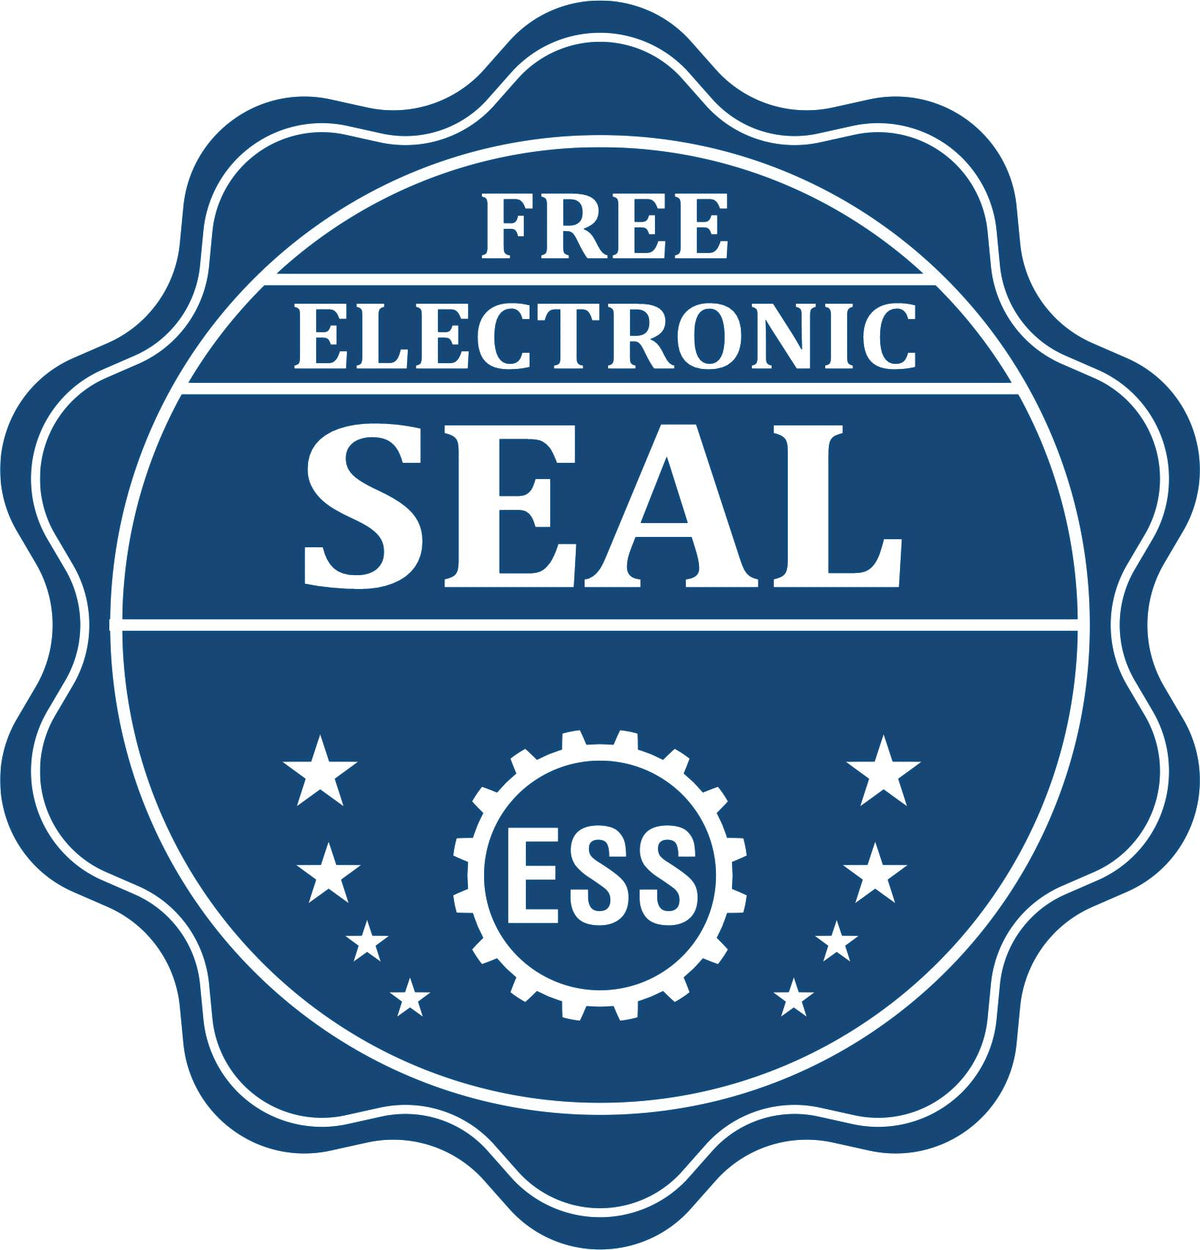 A badge showing a free electronic seal for the Long Reach Kentucky Geology Seal with stars and the ESS gear on the emblem.